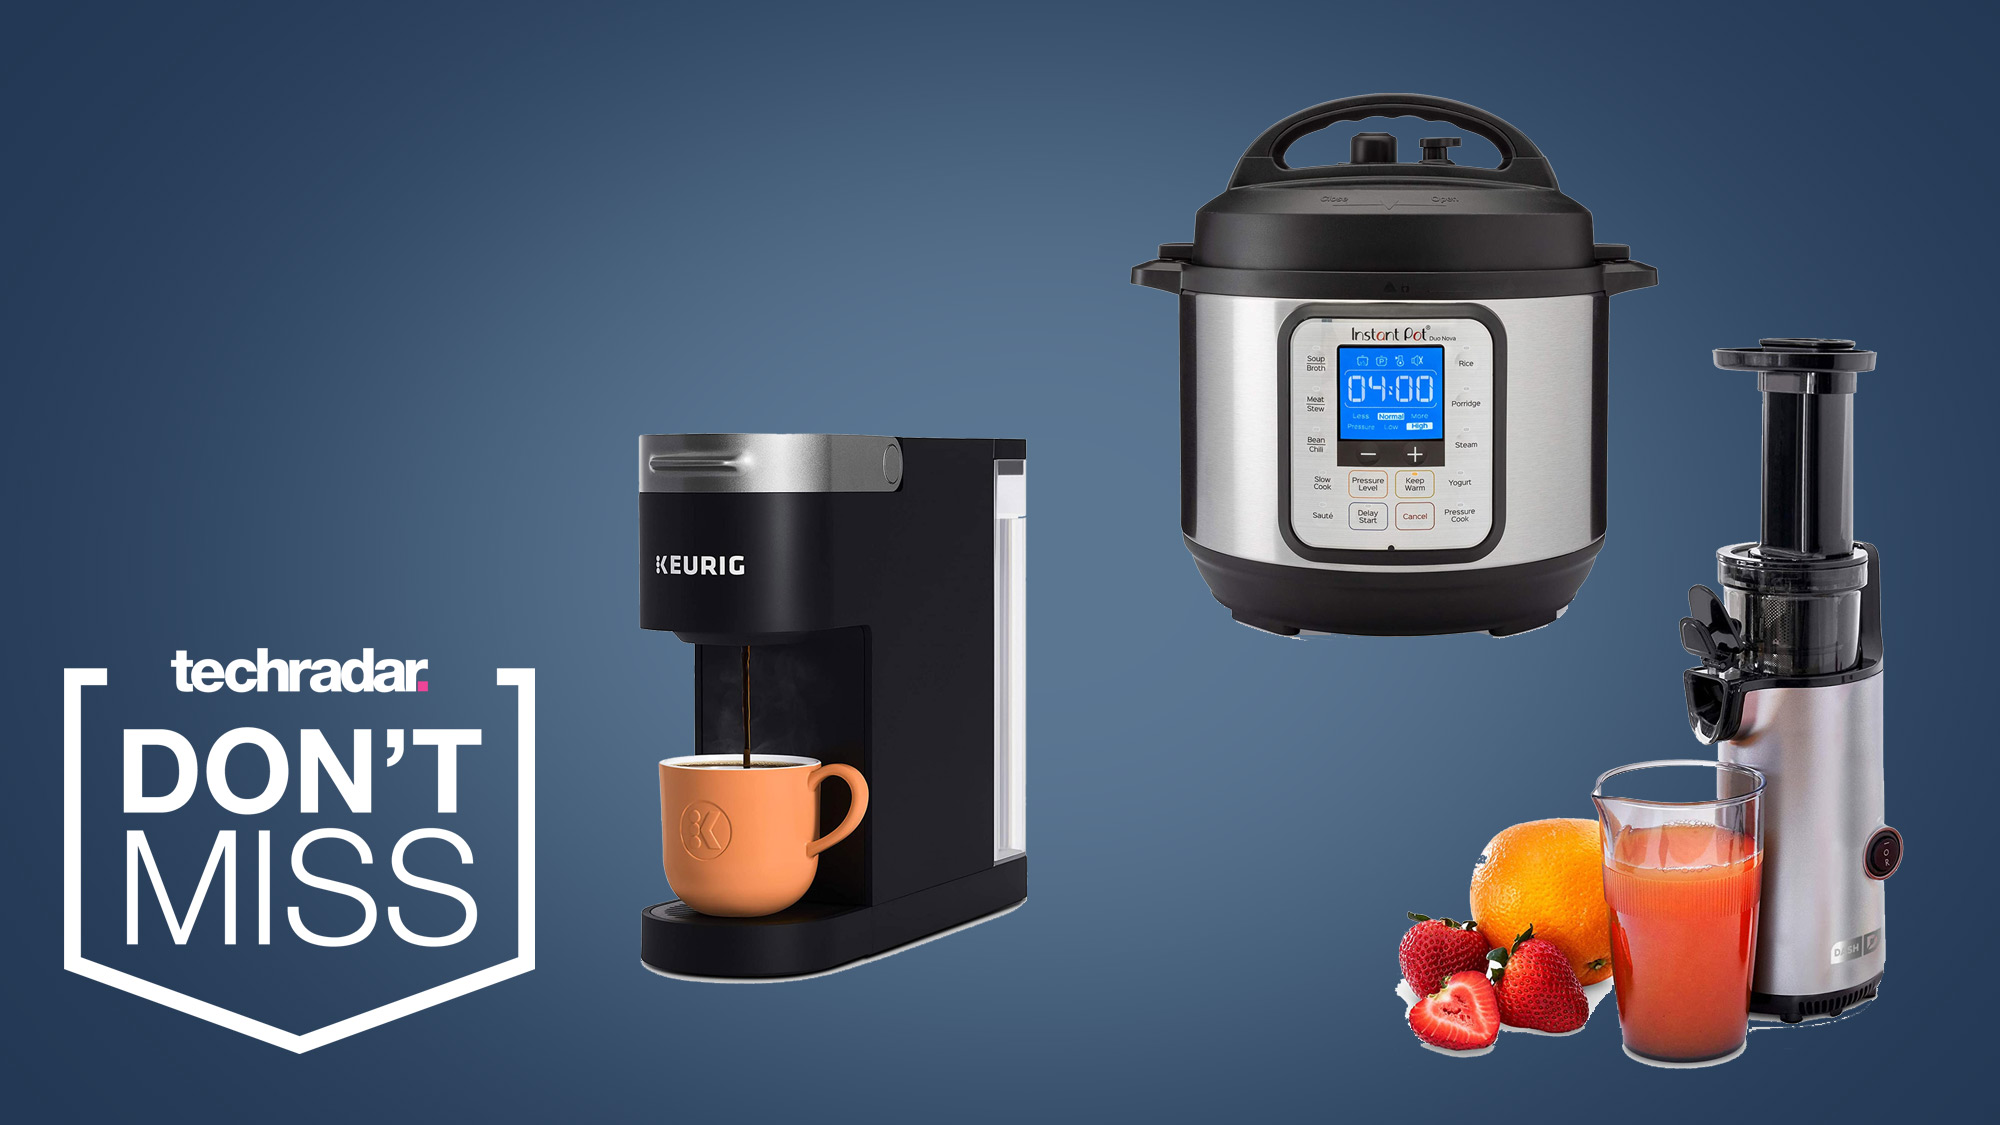 The best Prime Day kitchen appliance deals to improve your cooking Instant Pots, air fryers and